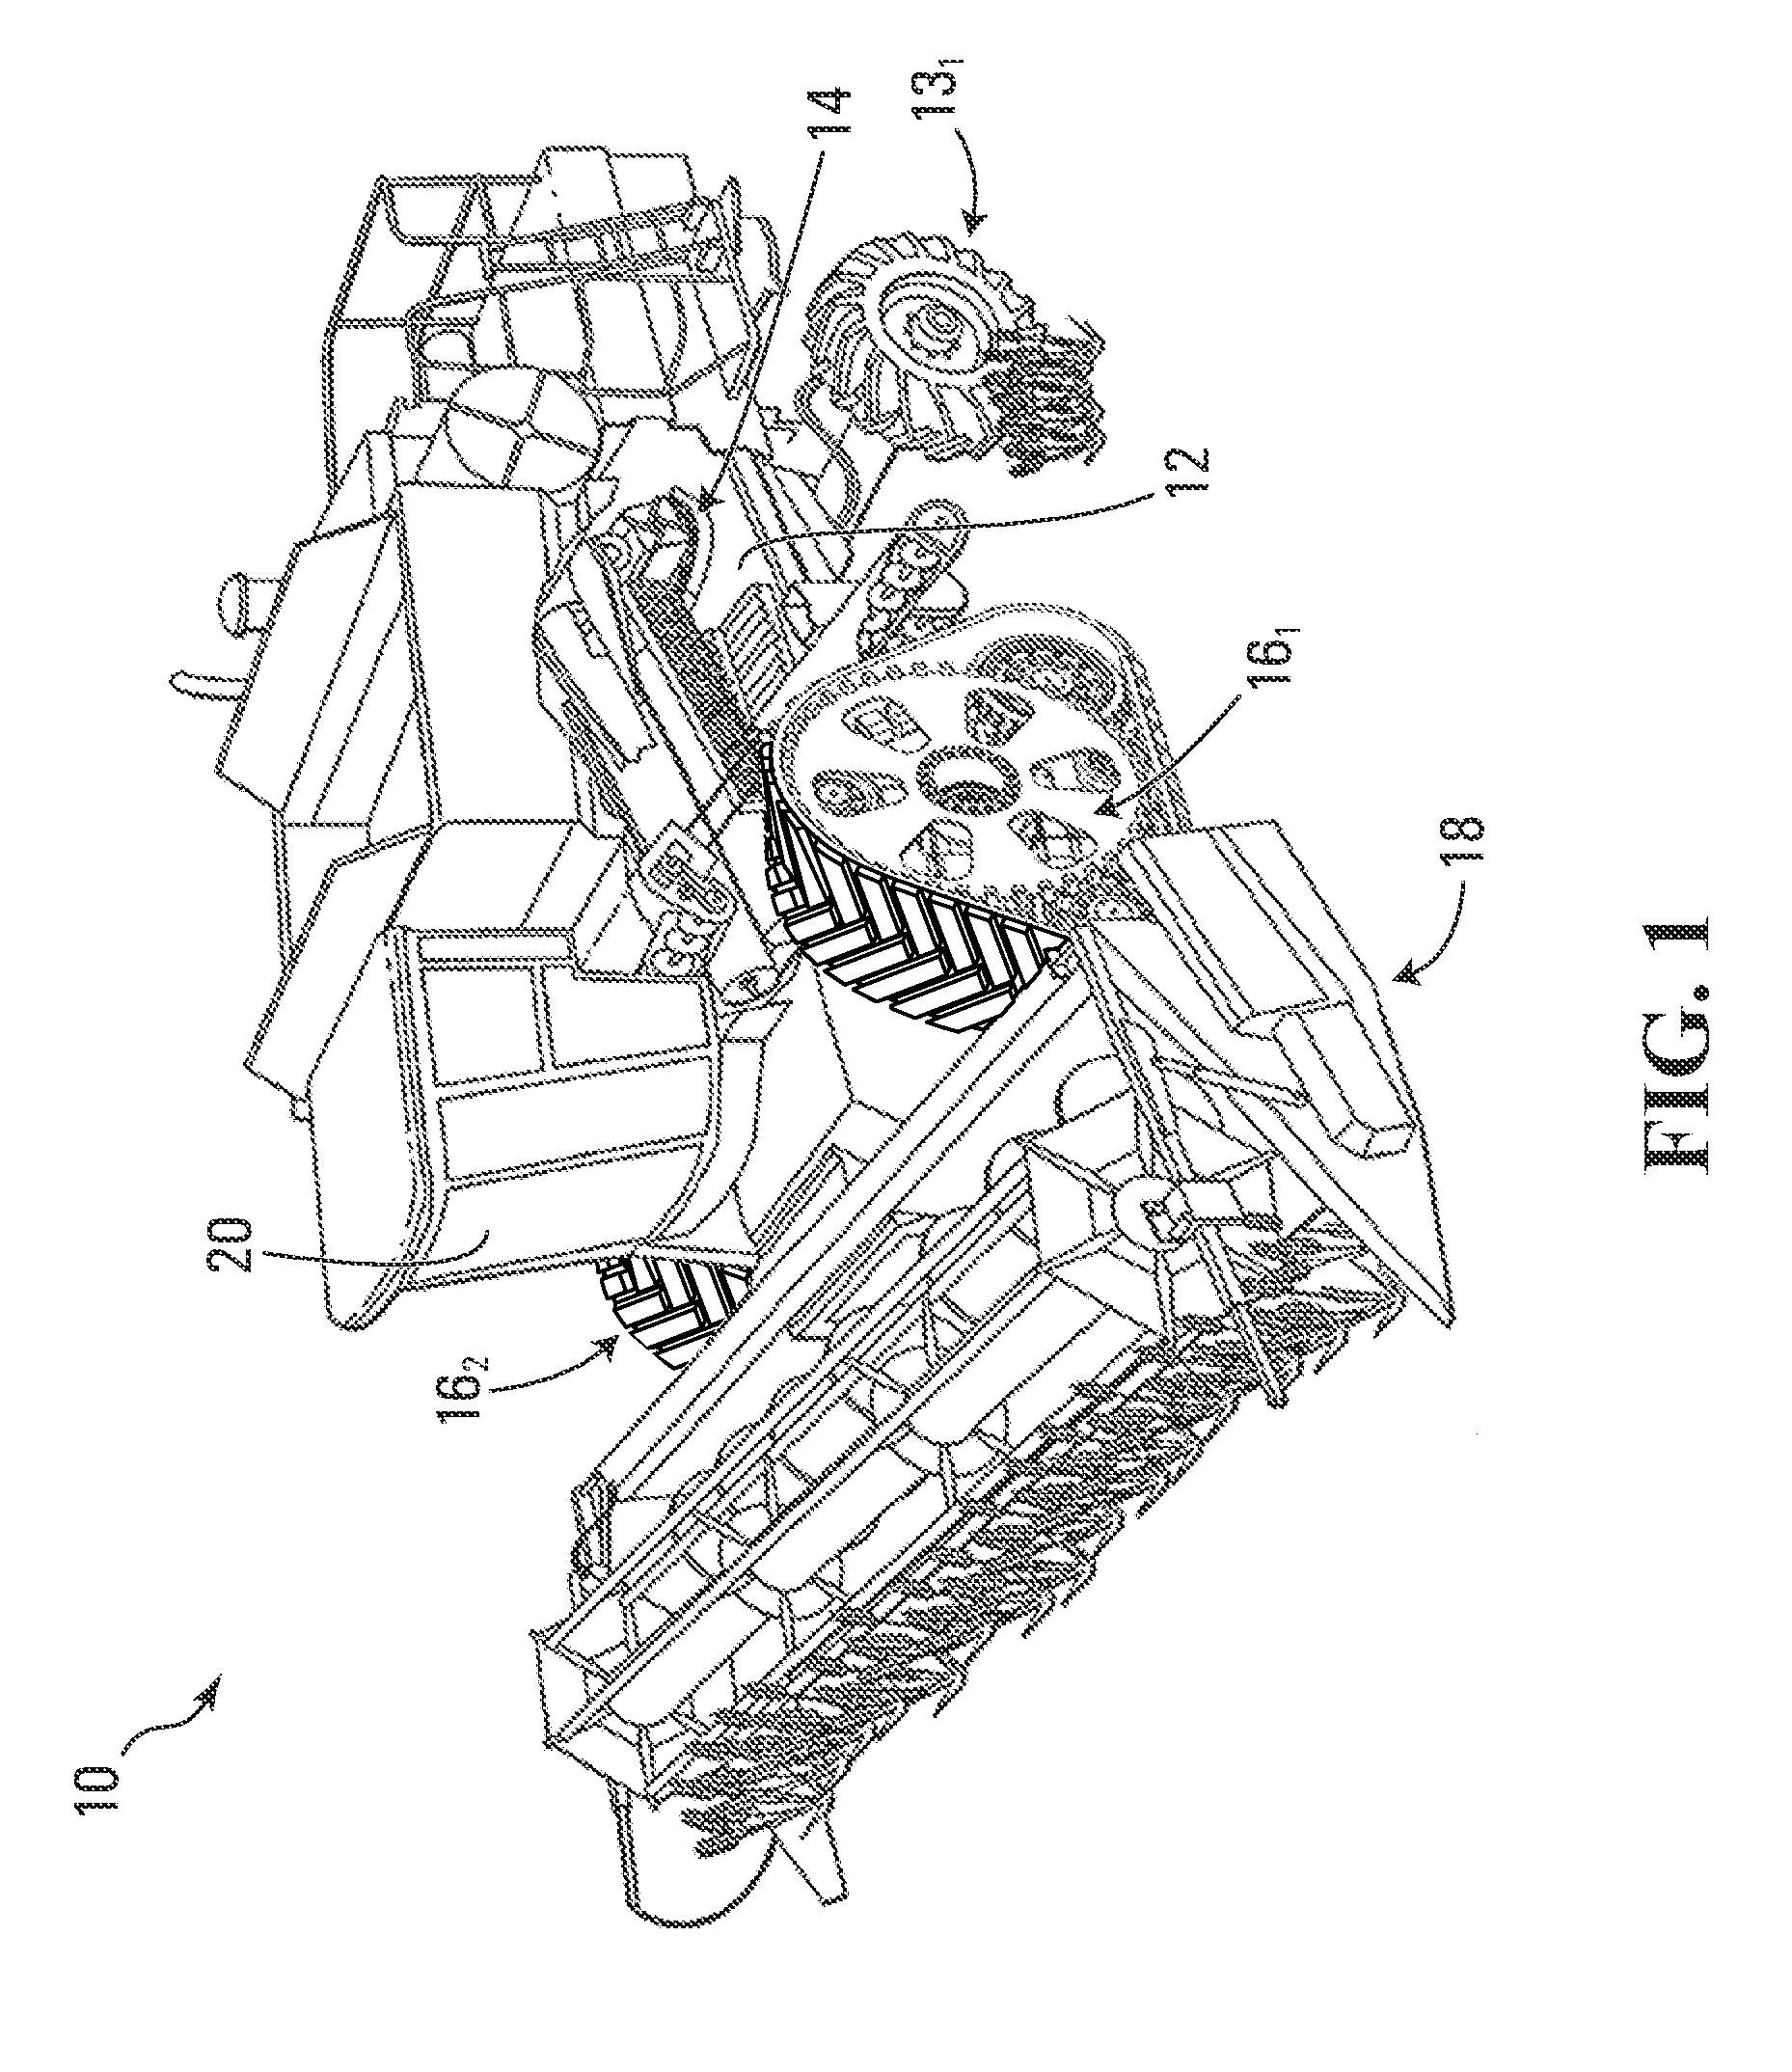 Track Assembly for Traction of a Vehicle